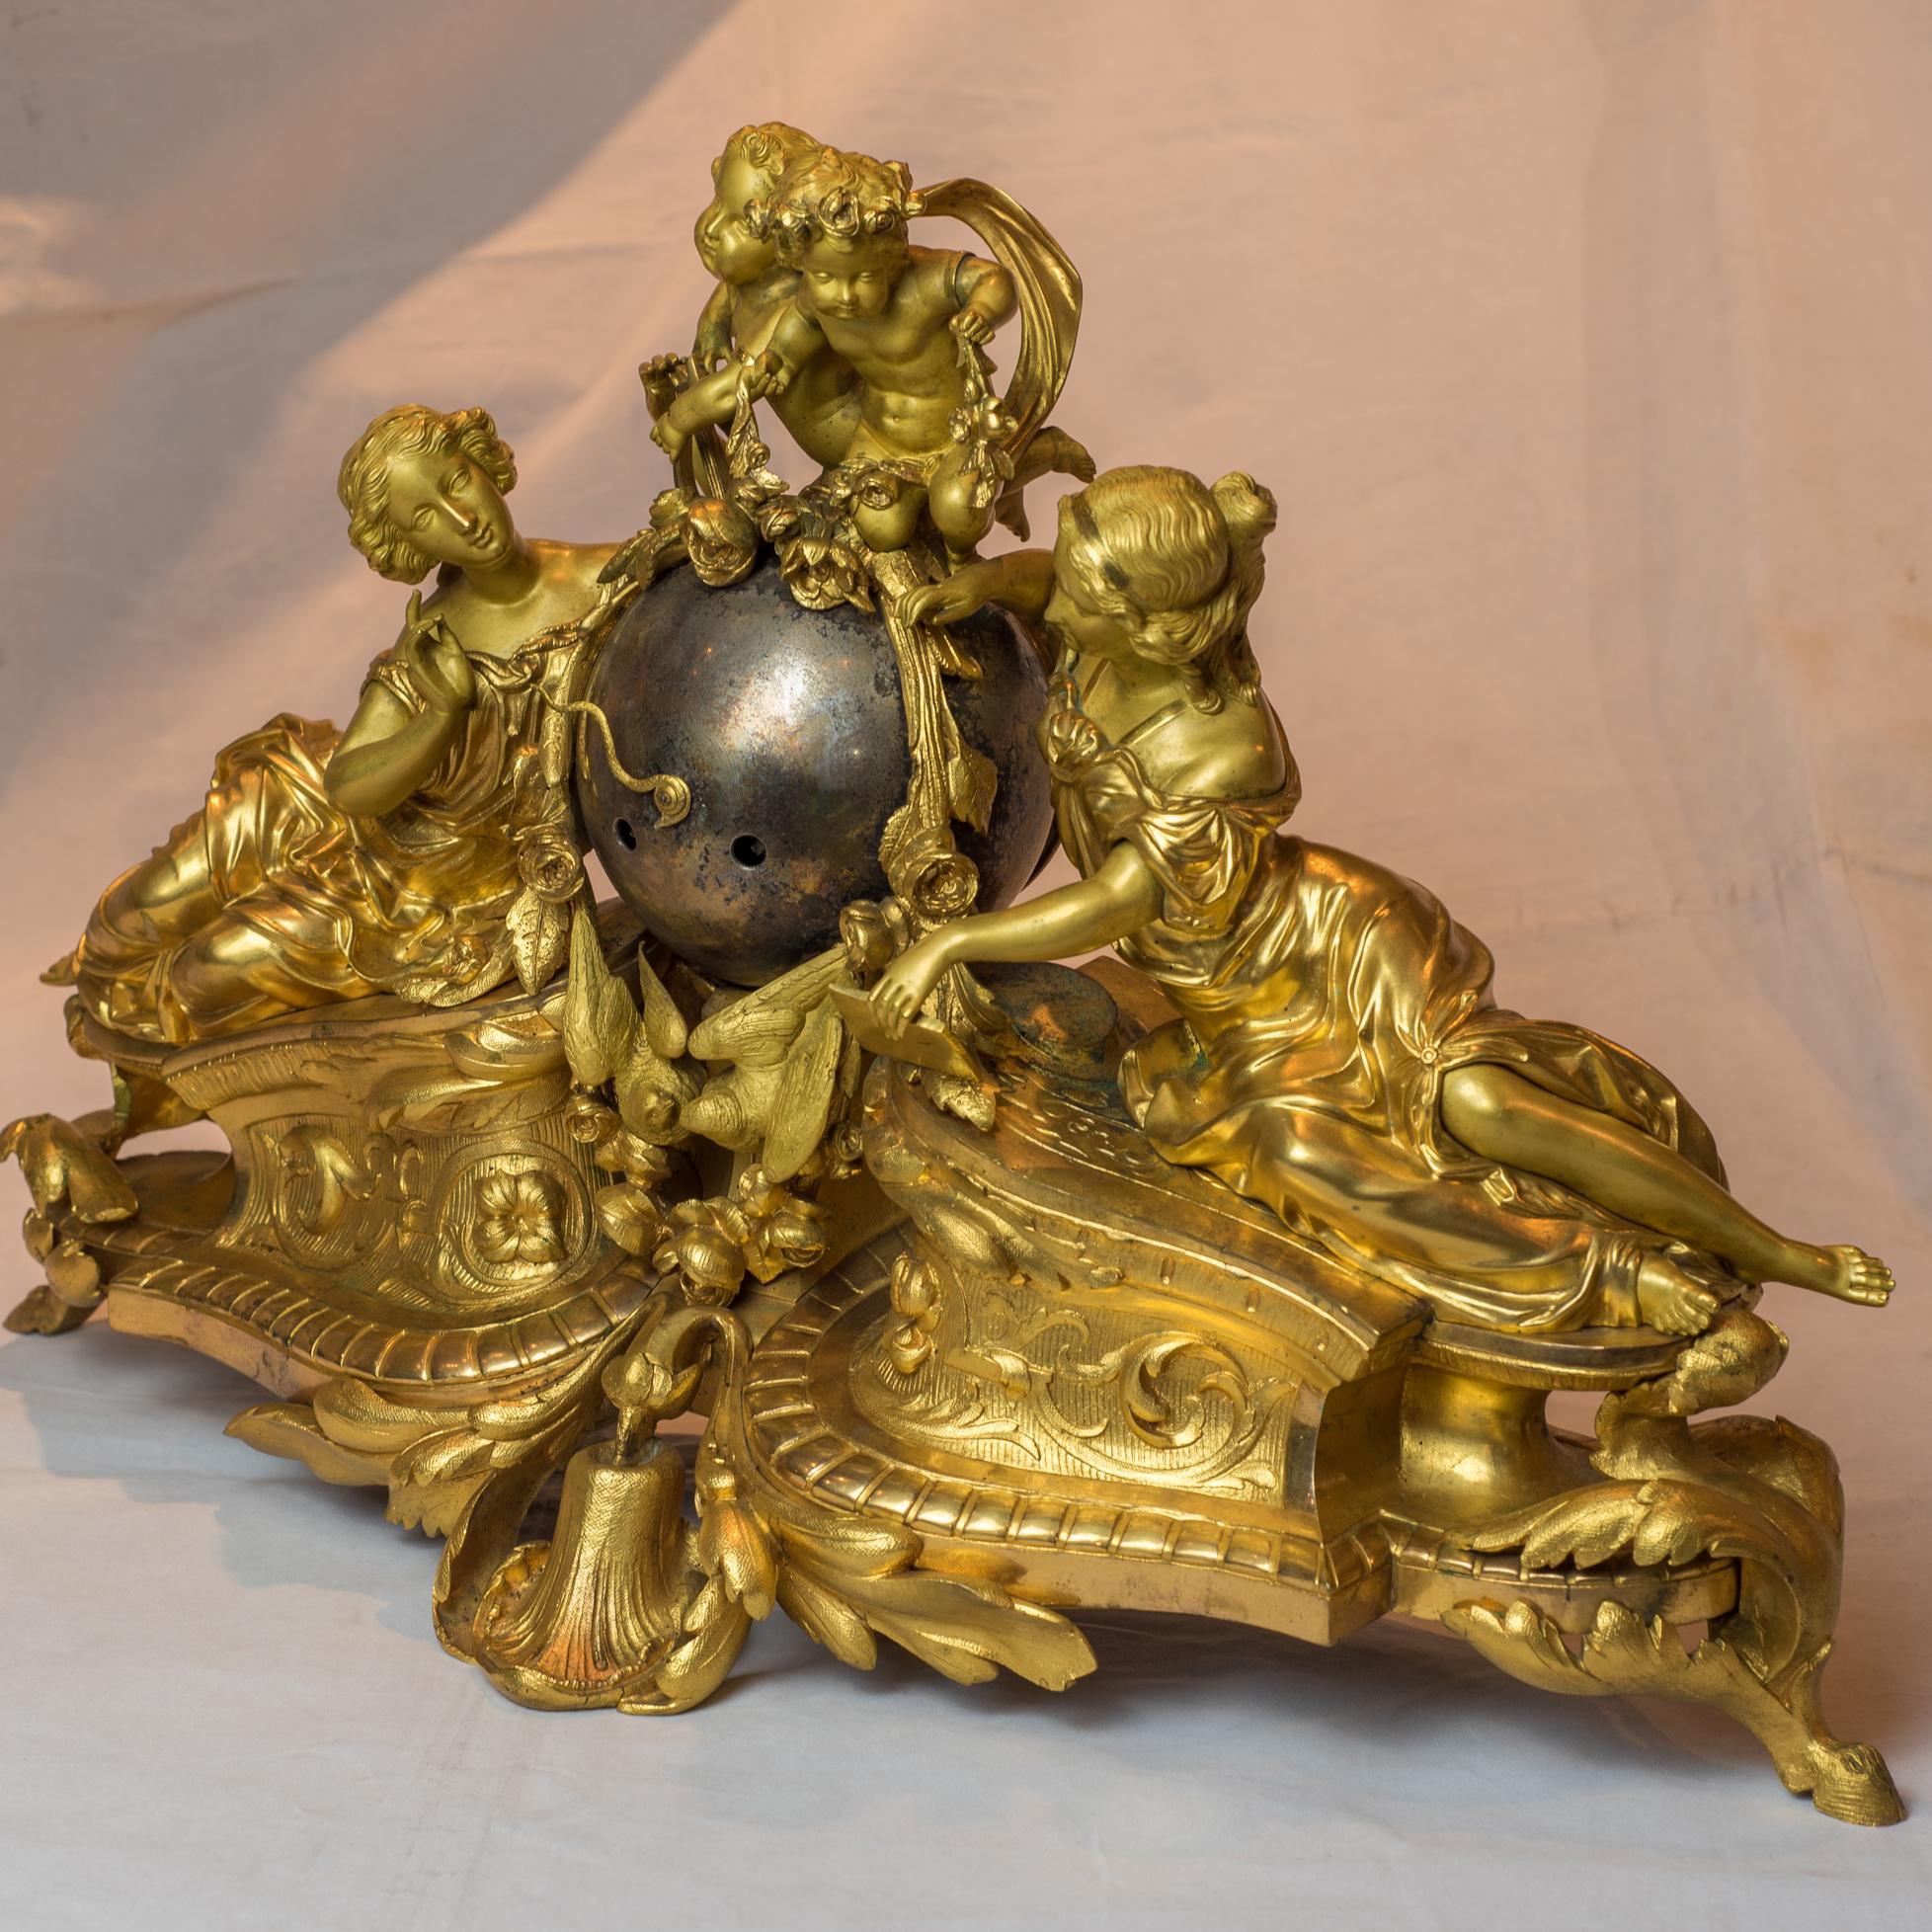 A fine quality gilt bronze figural mantel clock with classical figures of women and putti atop the bronze spherical clock face.

Origin: French
Date: 19th century
Size: 14 x 23 x 7 1/2 inches.